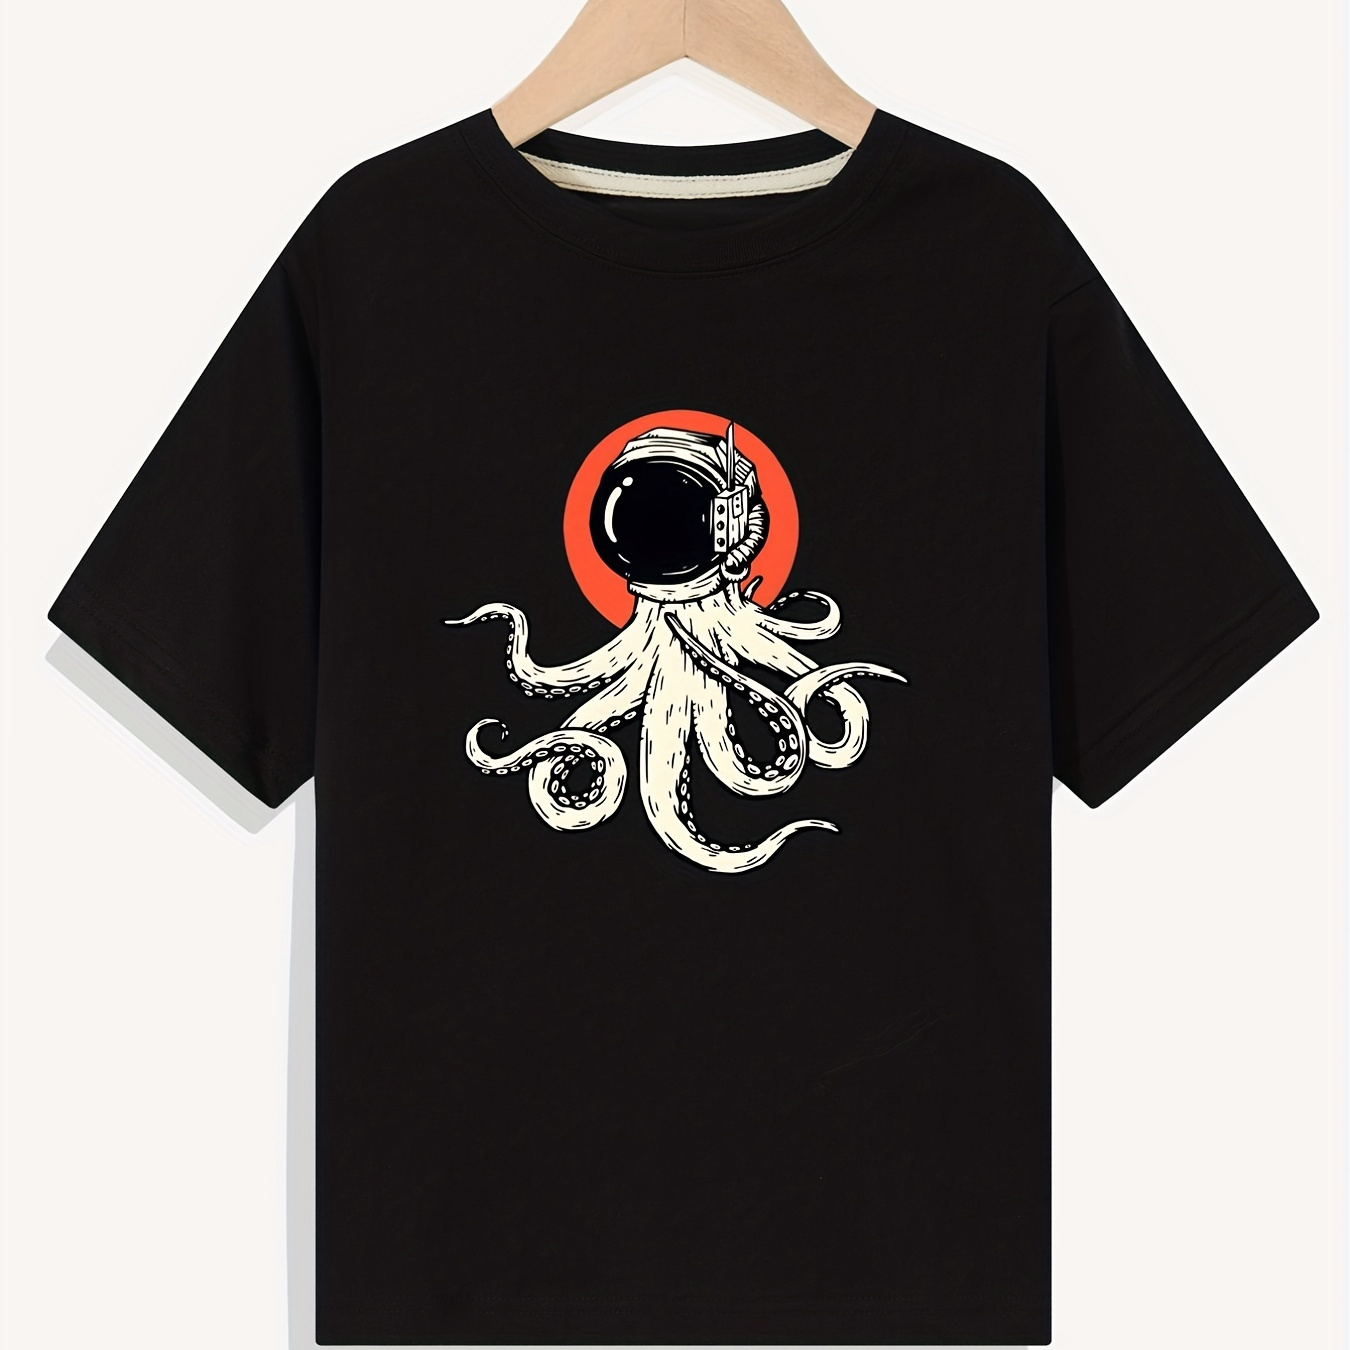 

Funny Octopus Print Boys Creative T-shirt, Casual Lightweight Comfy Short Sleeve Tee Tops, Kids Clothings For Summer